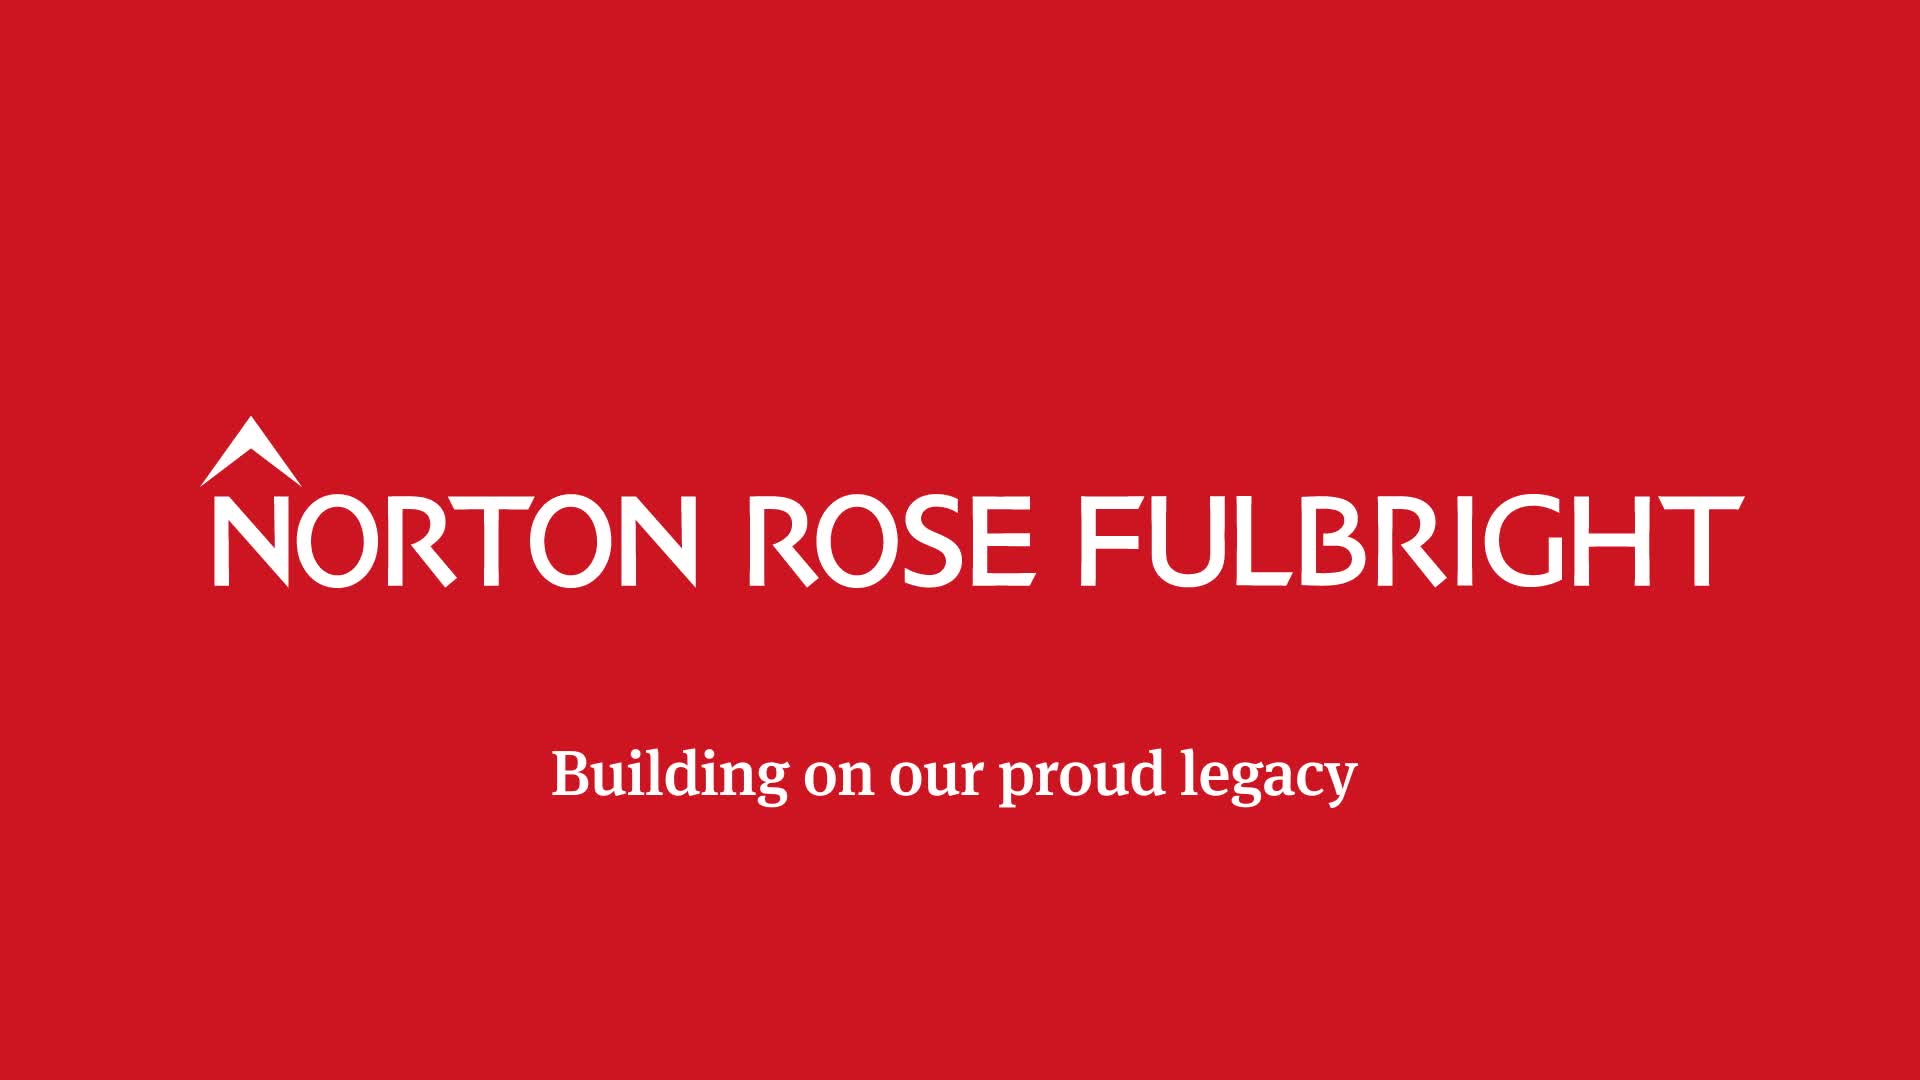 Norton Rose Fulbright | Building on our proud legacy